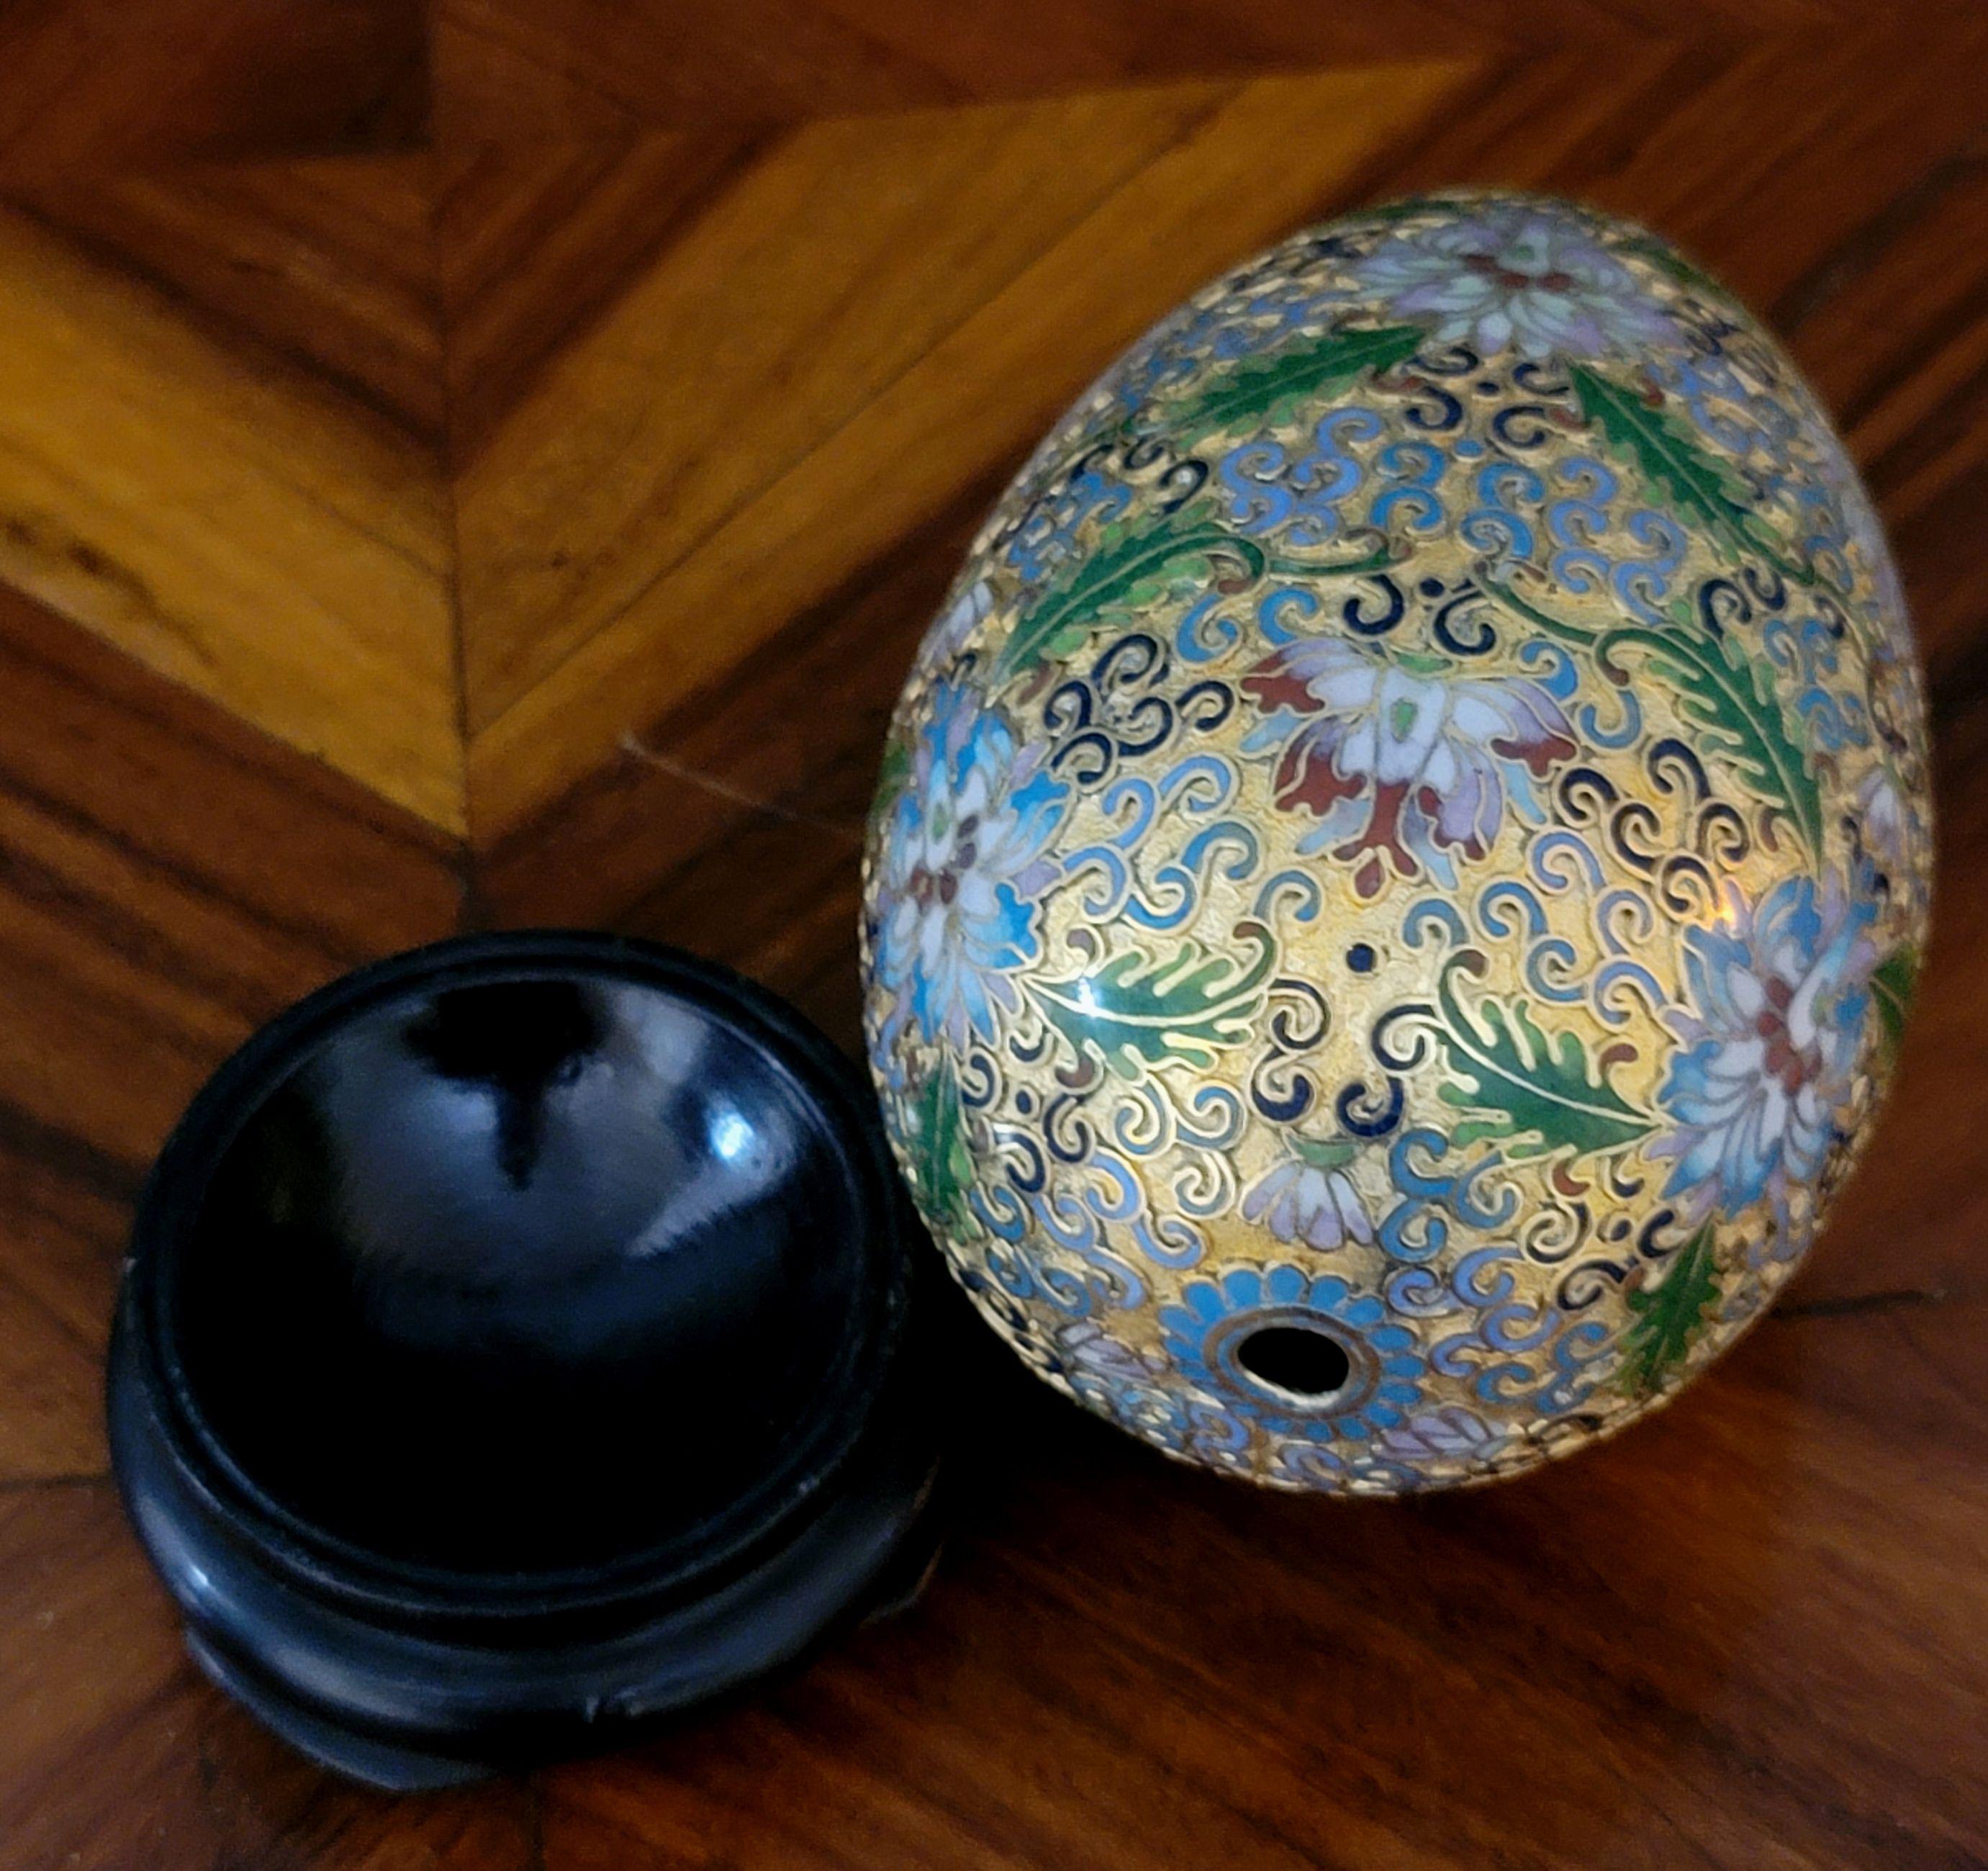 Cloissoné Chinese Cloisonné Enamel Egg with Wood Stand, Early 20 Century